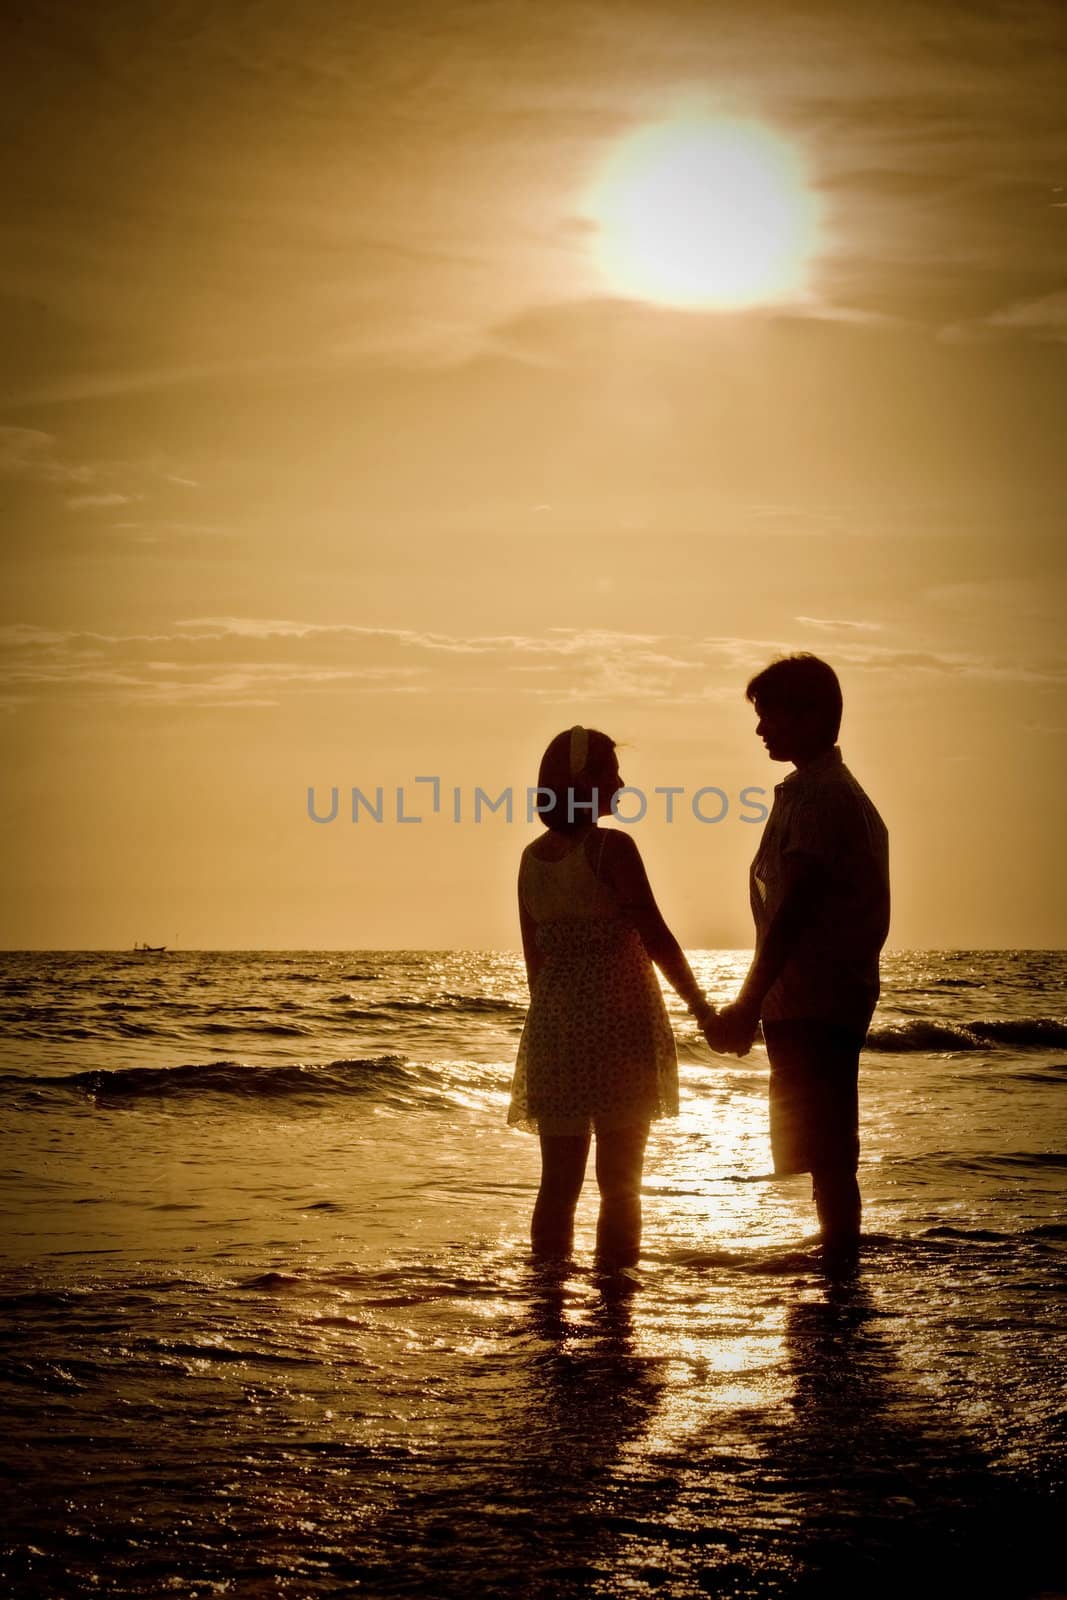 romantic Scene of couples on the Beach with sunset